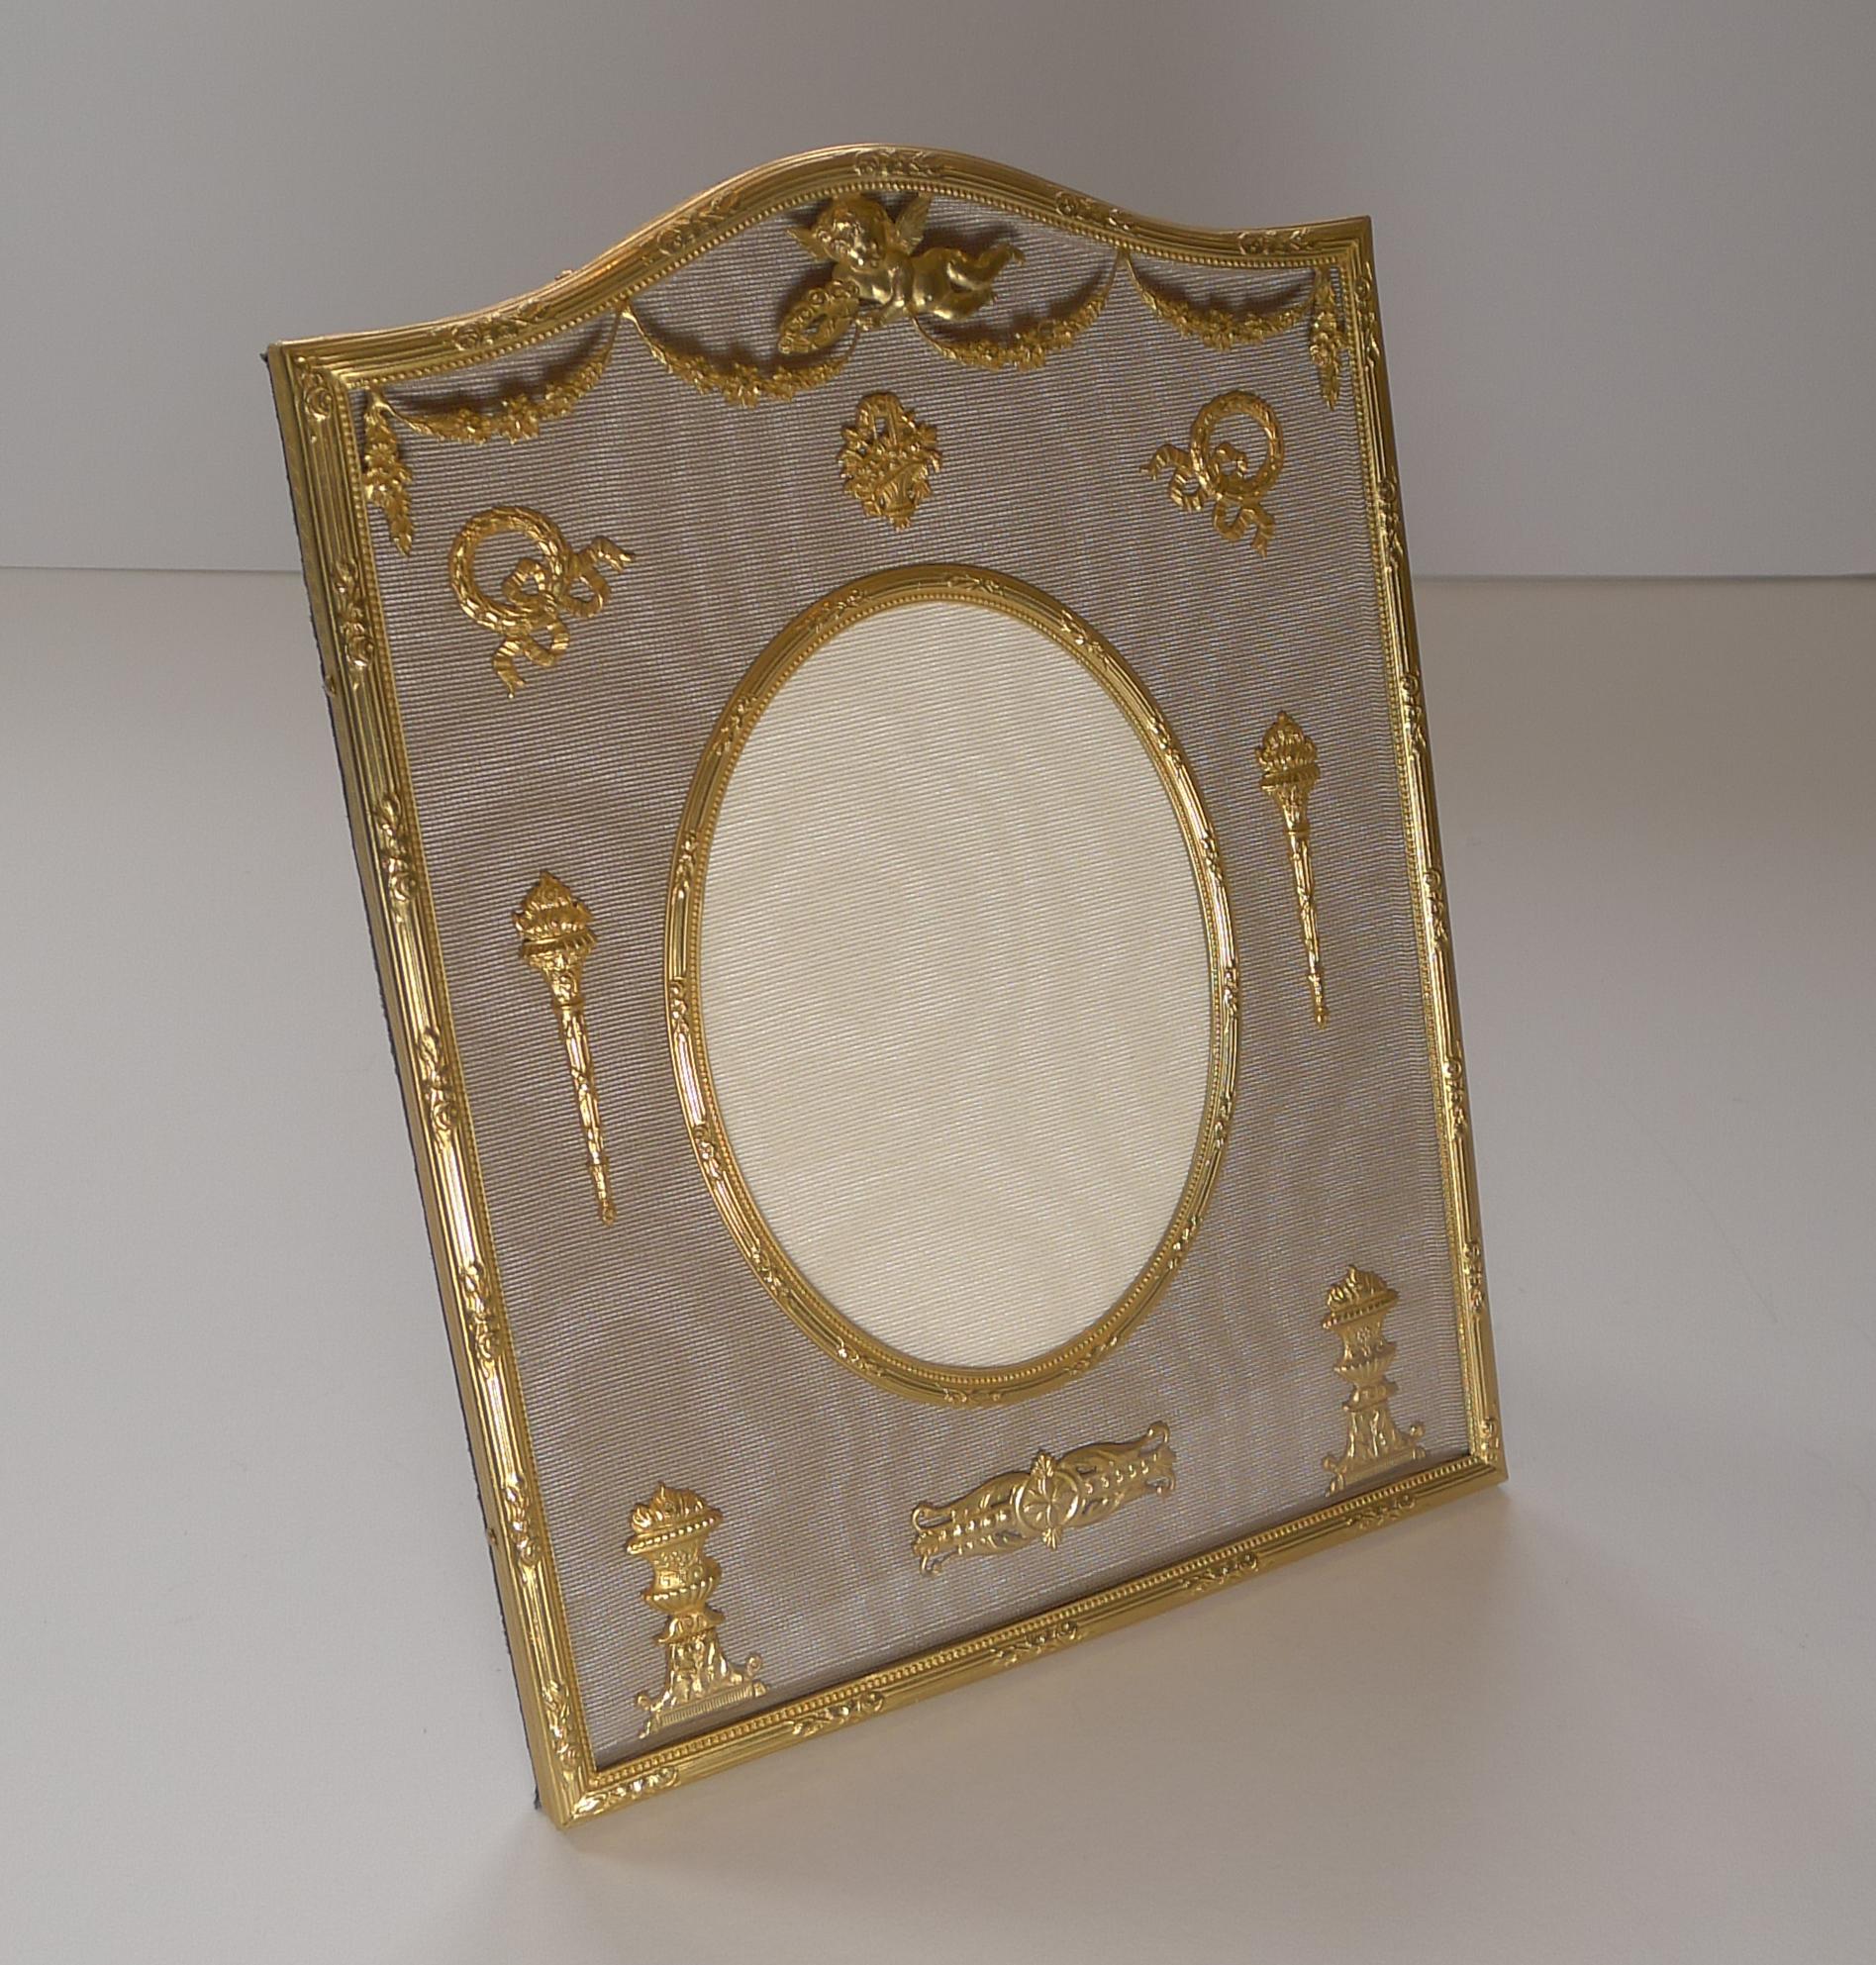 A handsome bronze dore / Ormolu photograph frame with an arched top and a central oval aperture behind the glass.

The taupe coloured taffeta is mounted with gilded bronze motifs and to the top there is a mount on top of the glass with a central